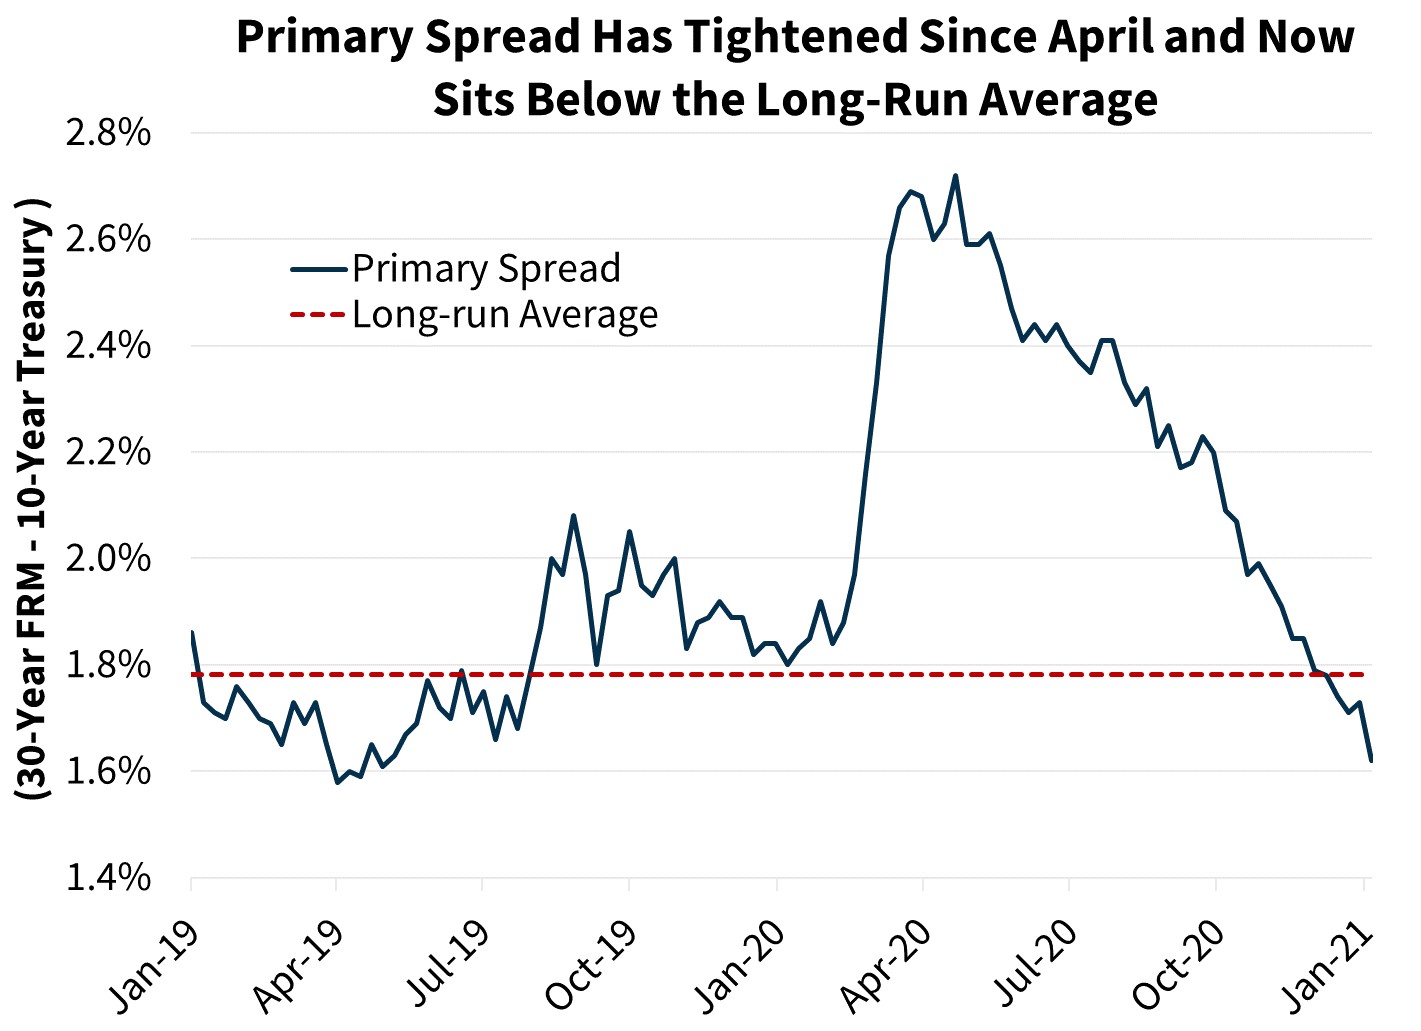  Primary Spread Has Tightened Since April and Now Sits Below the Long-Run Average
